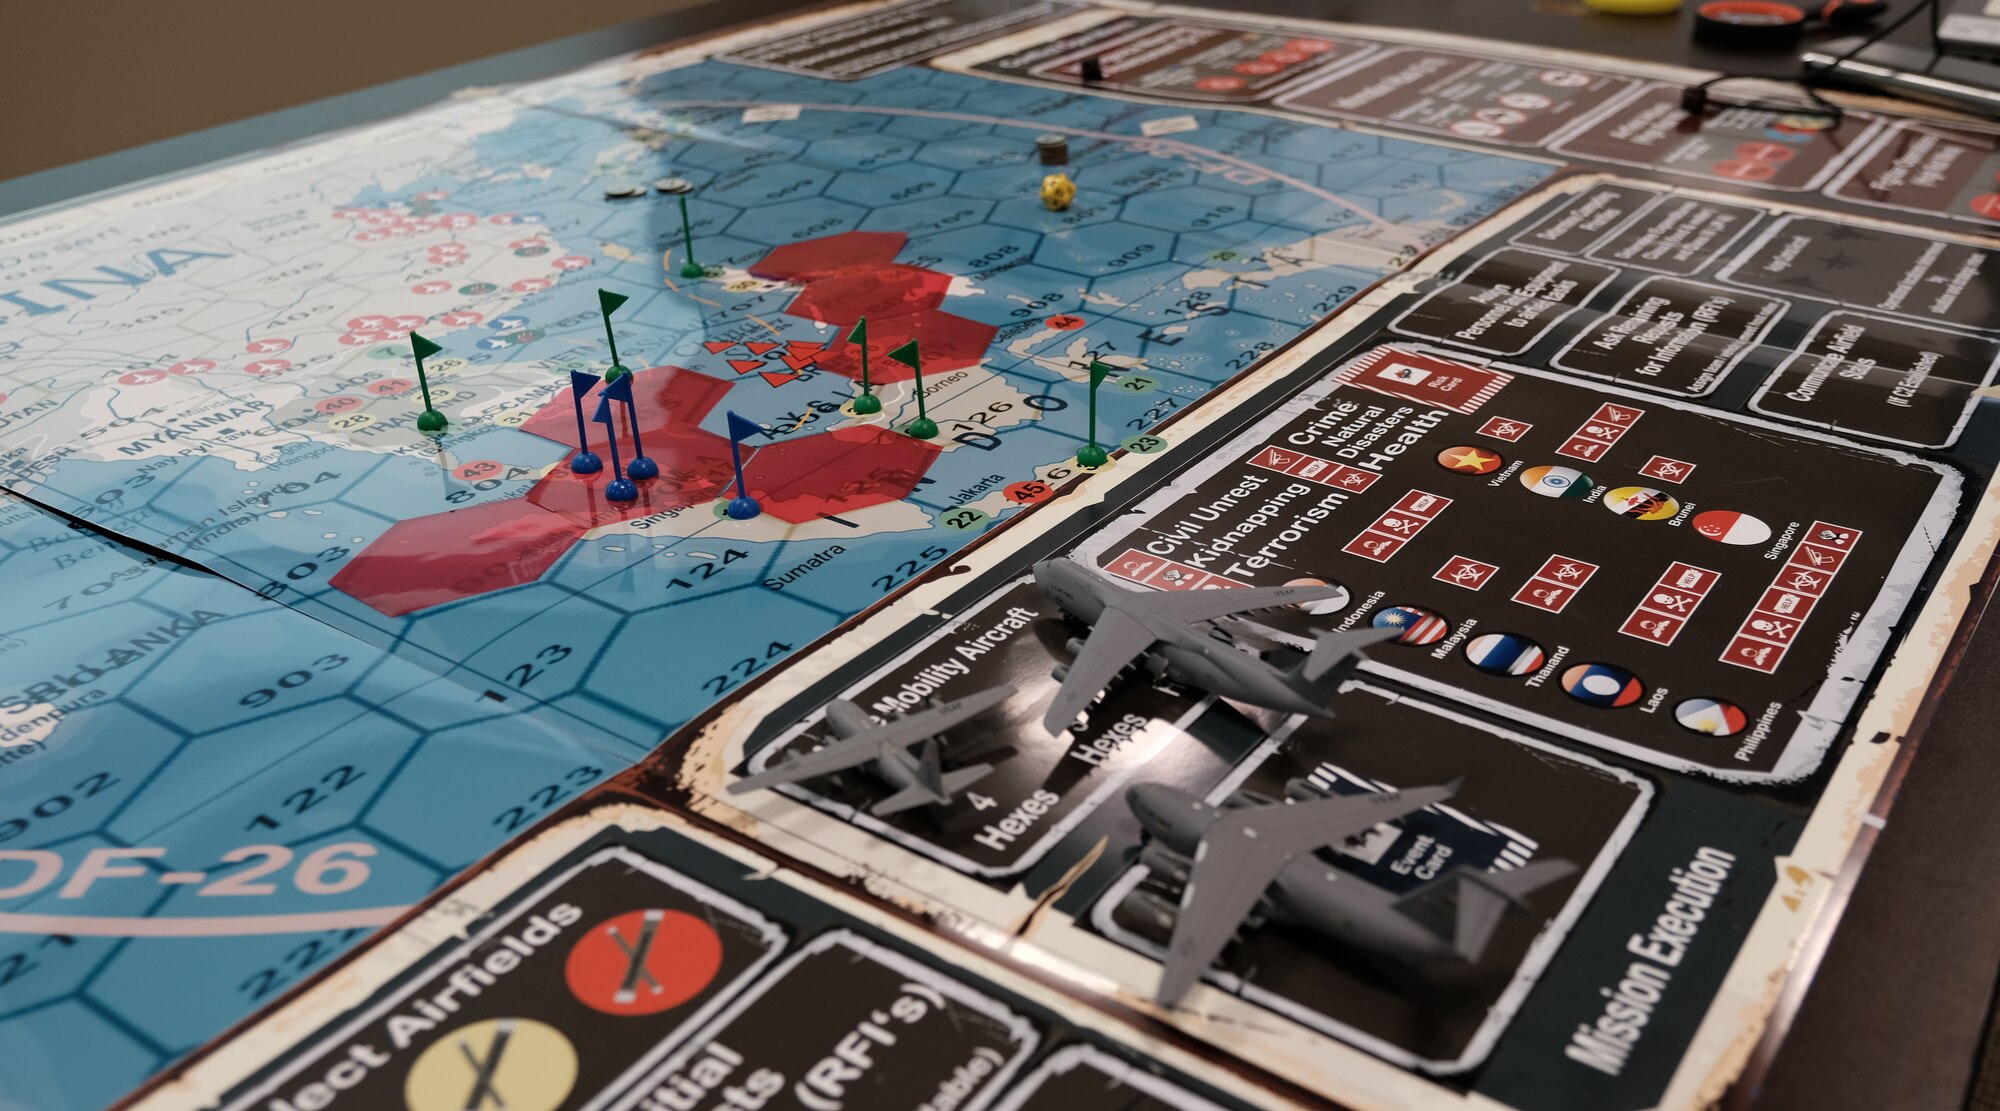 photo of board game with miniature planes and flags on a map